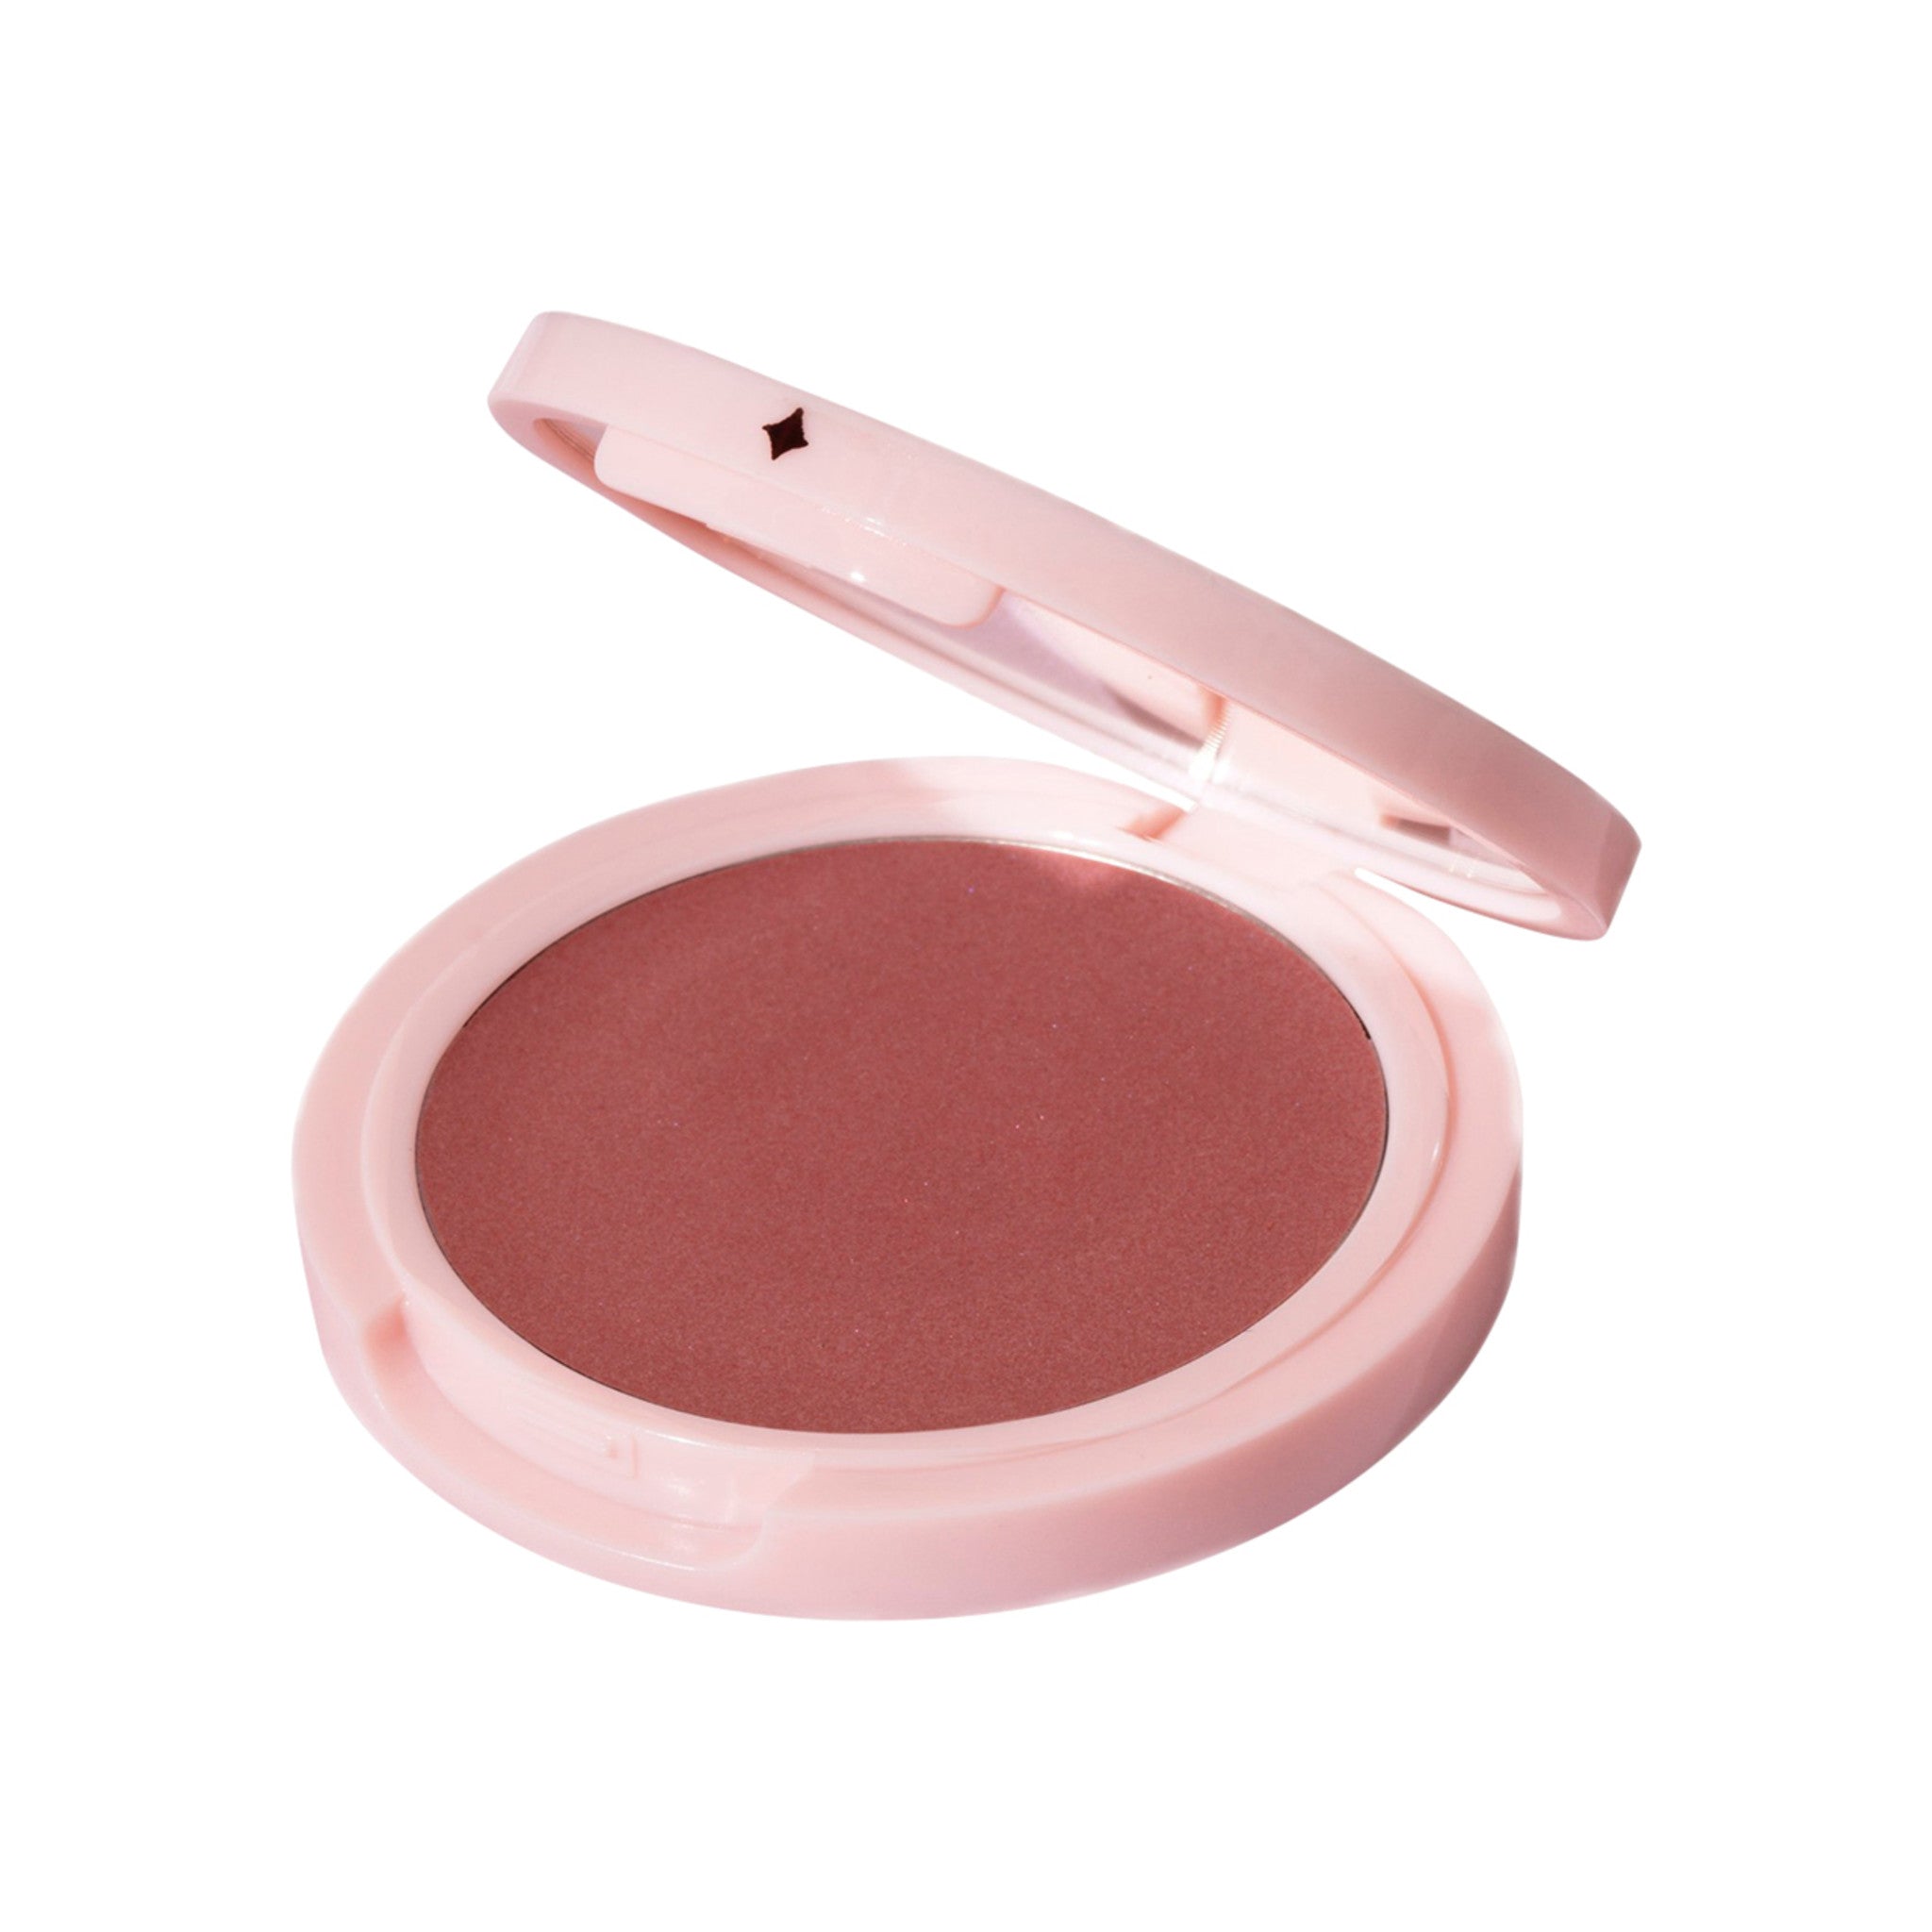 Jillian Dempsey Cheek Tint Color/Shade variant: Bloom main image. This product is in the color pink